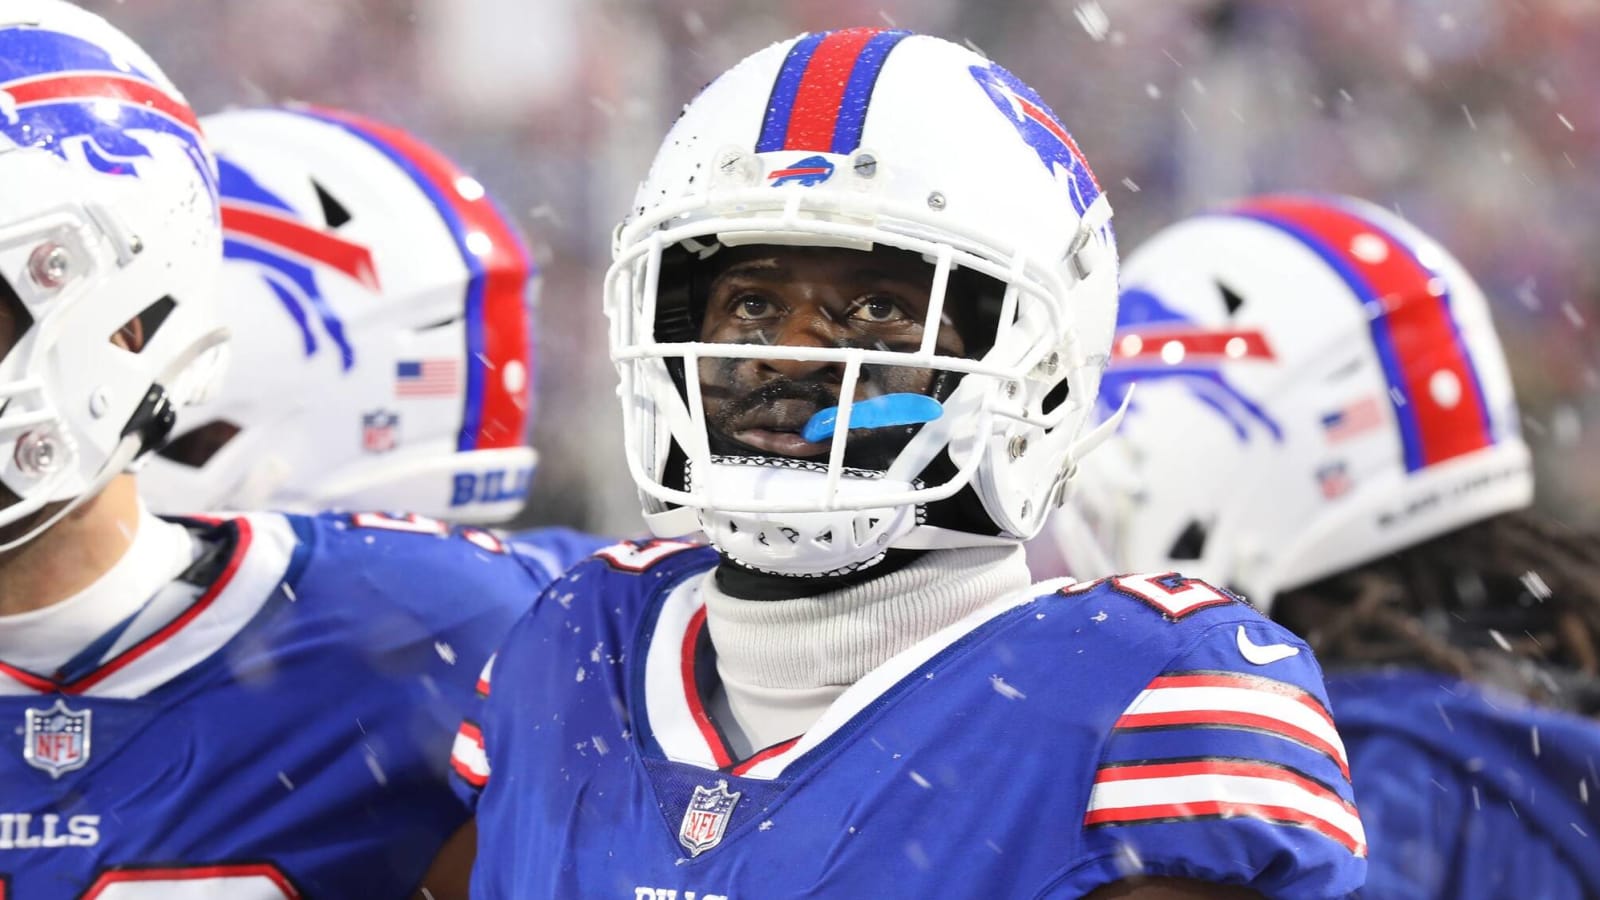 Comparing Tre’Davious White’s Signing to Jalen Ramsey: Apples to Oranges?